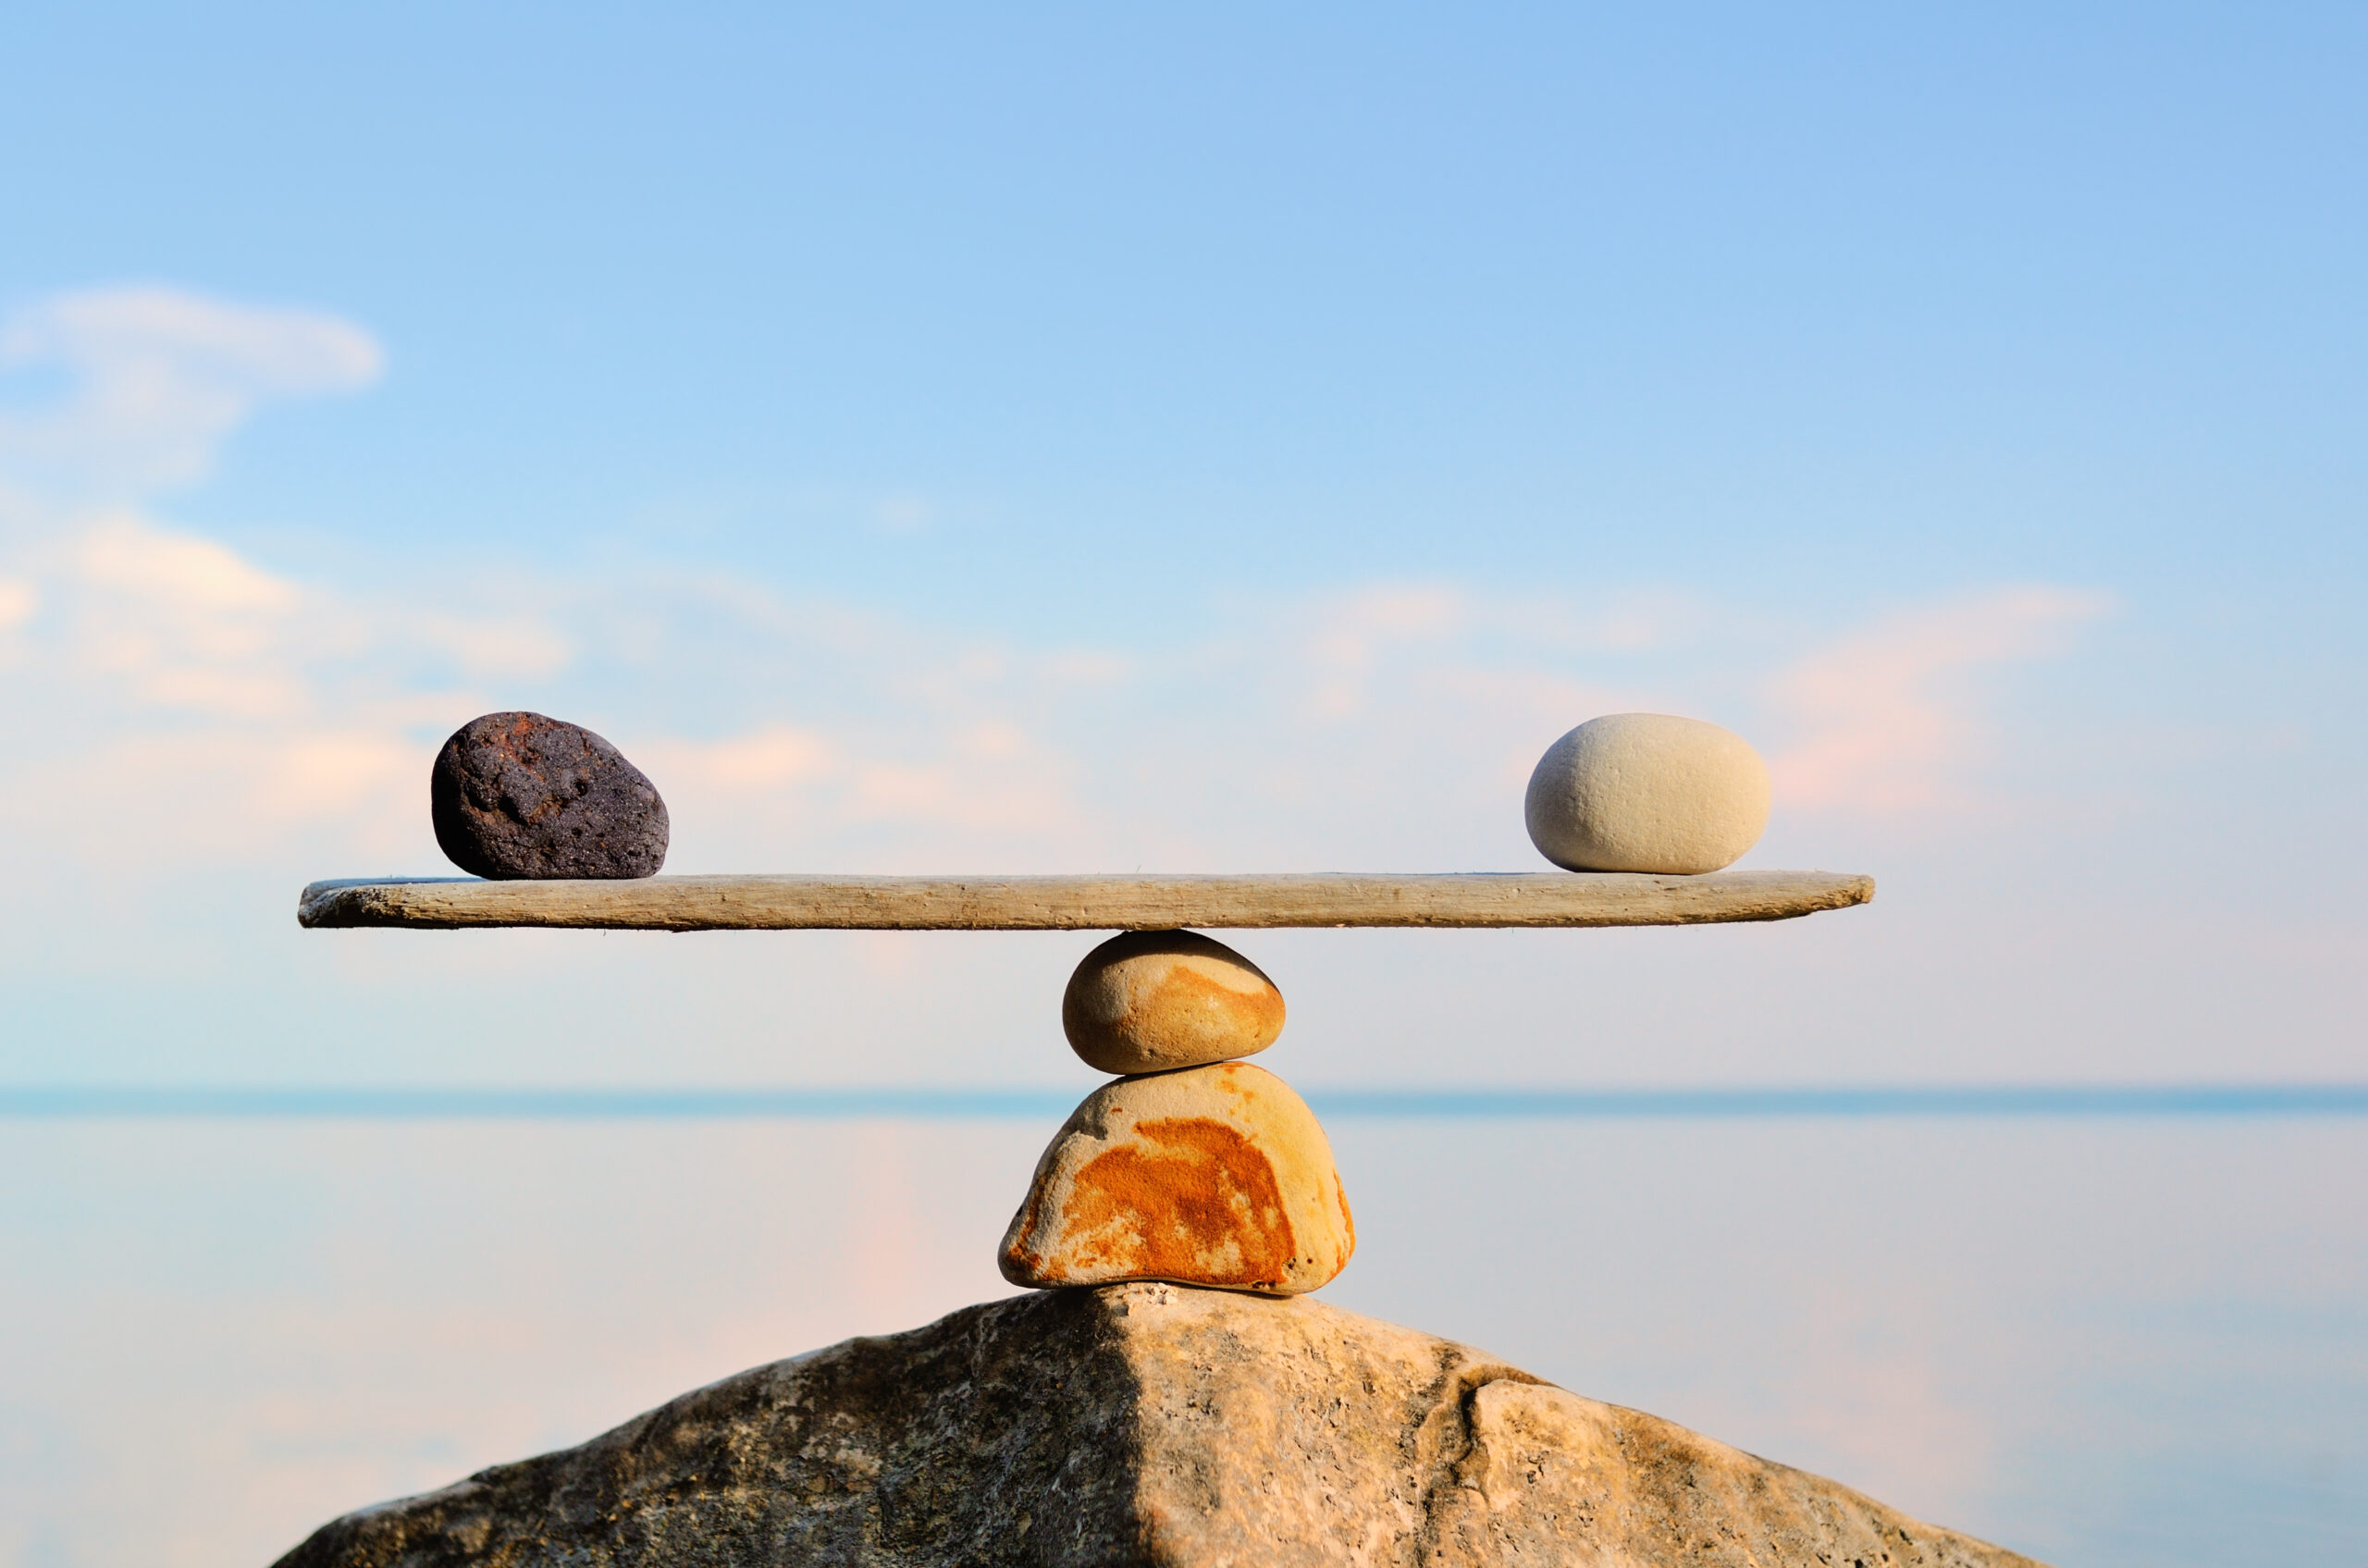 Pebbles balance on the top of the stone